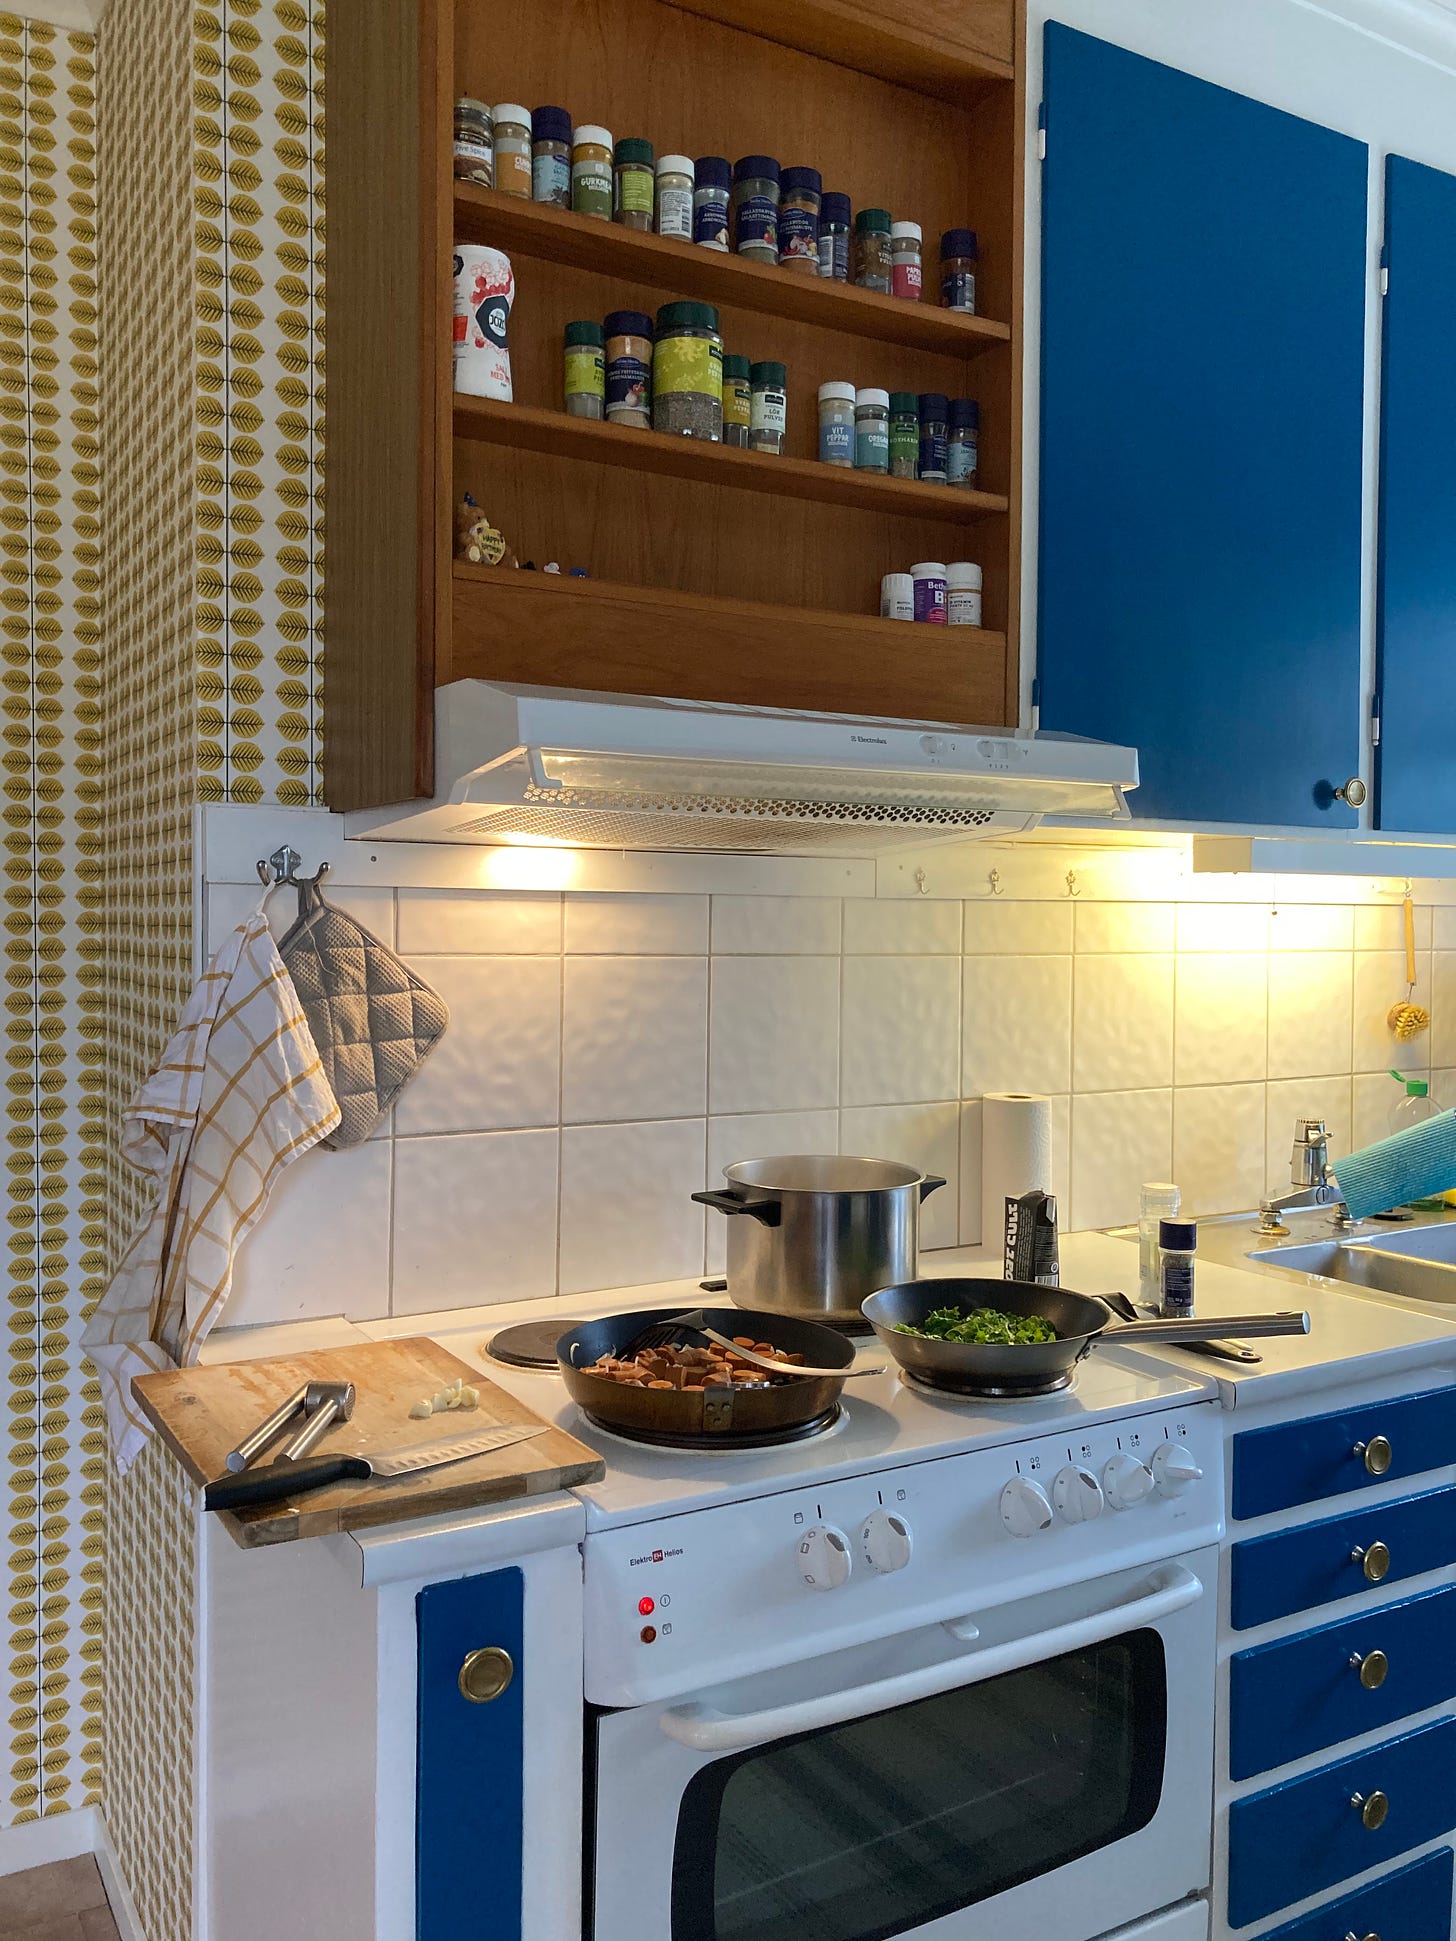 A kitchen with blue cupboard doors, yellow wallpaper, and a wooden spice shelf above a white stove with pans on it.